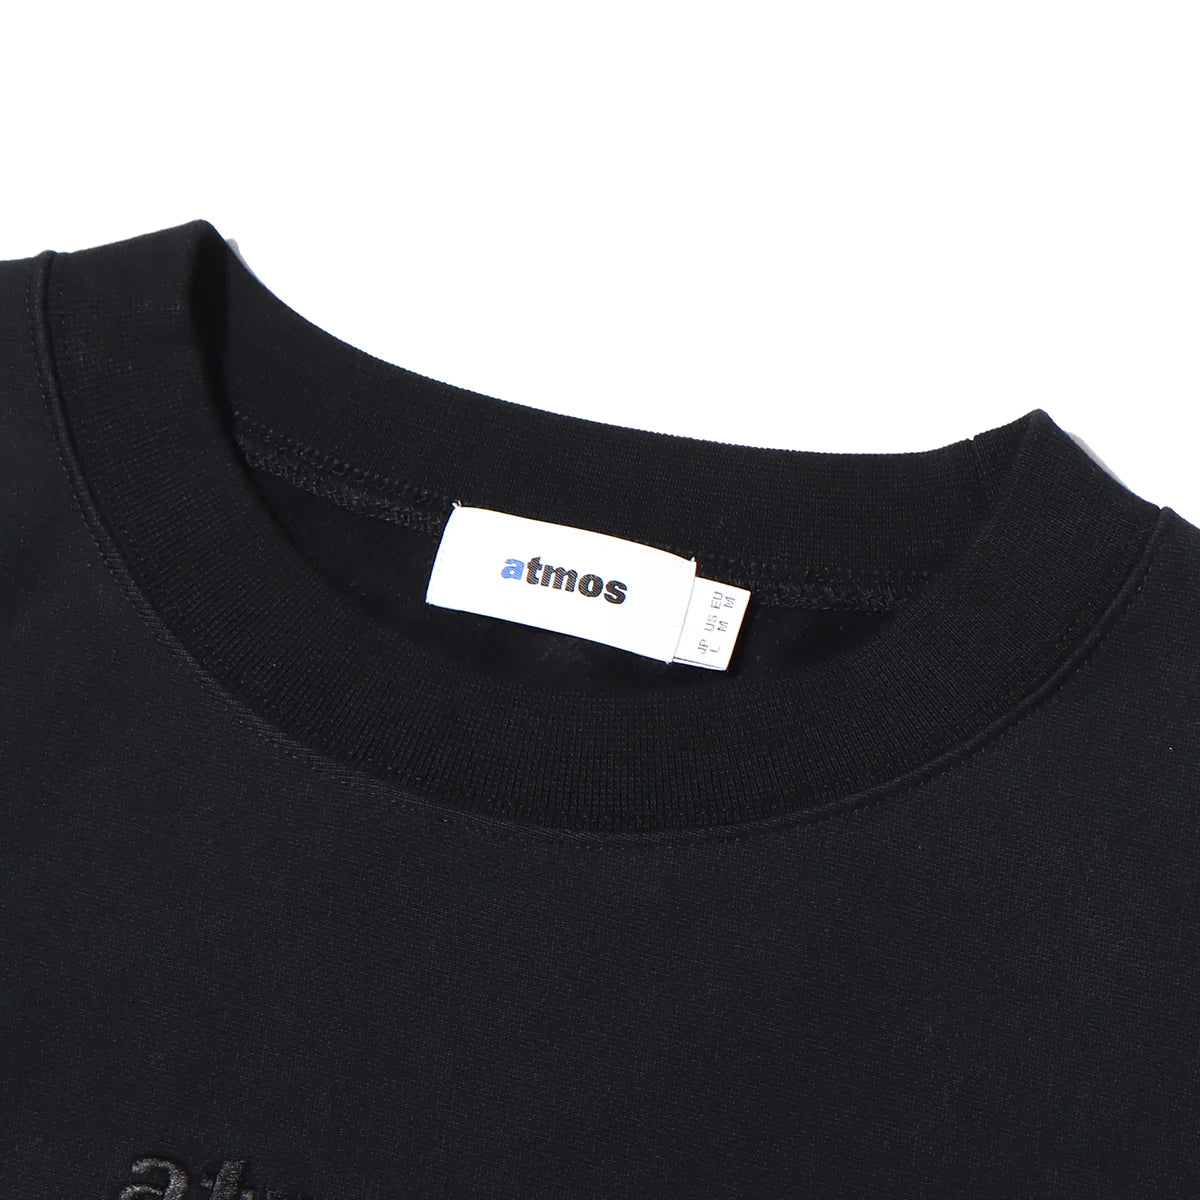 ATMOS EMBROIDERY CLASSIC LOGO HEAVY WEIGHT SWEAT